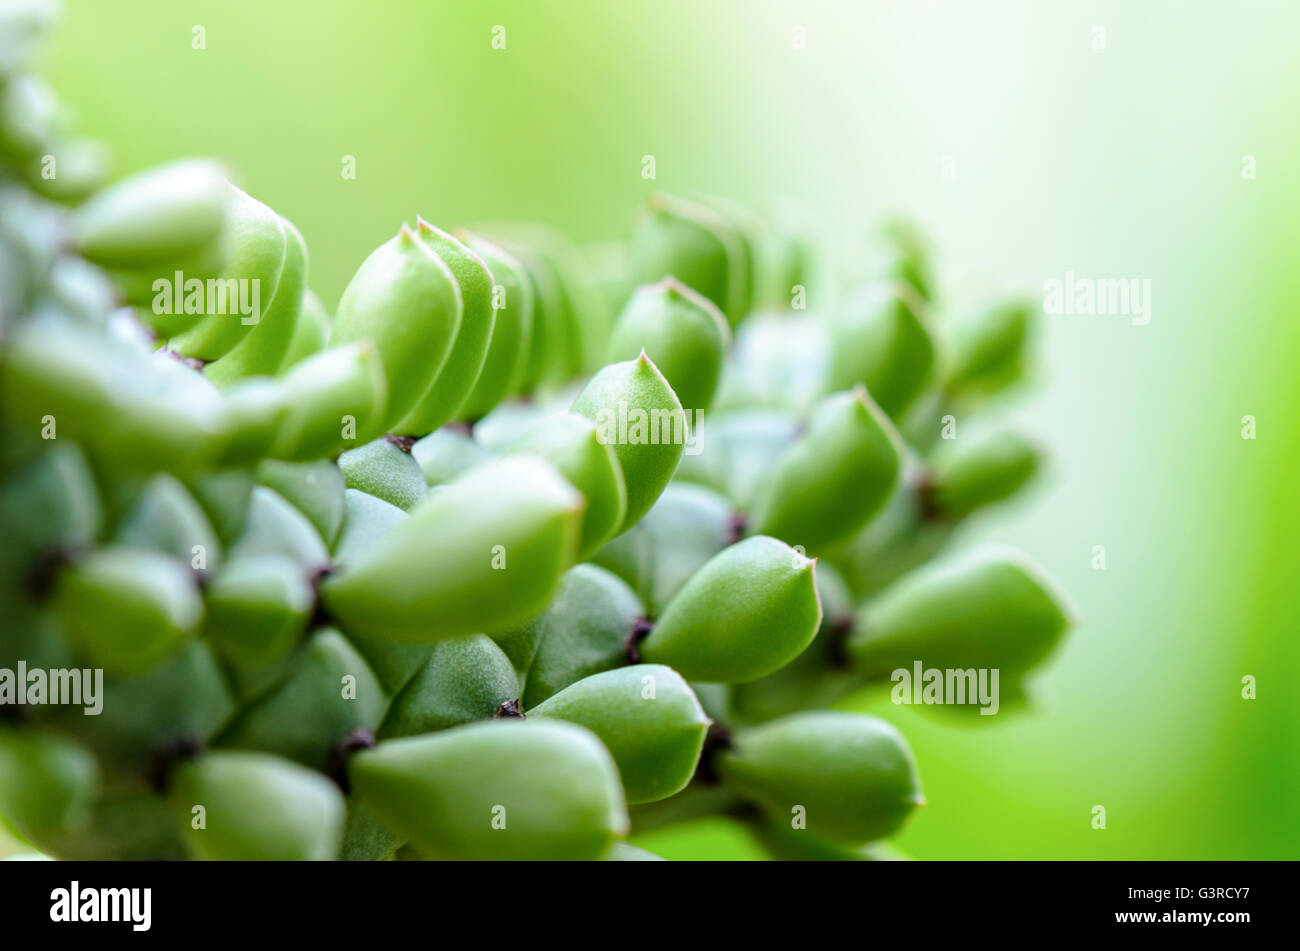 Close-up beautiful green nature for background. Exotic ornamental plants shaped like a snake and leaves resemble snake scales in Stock Photo